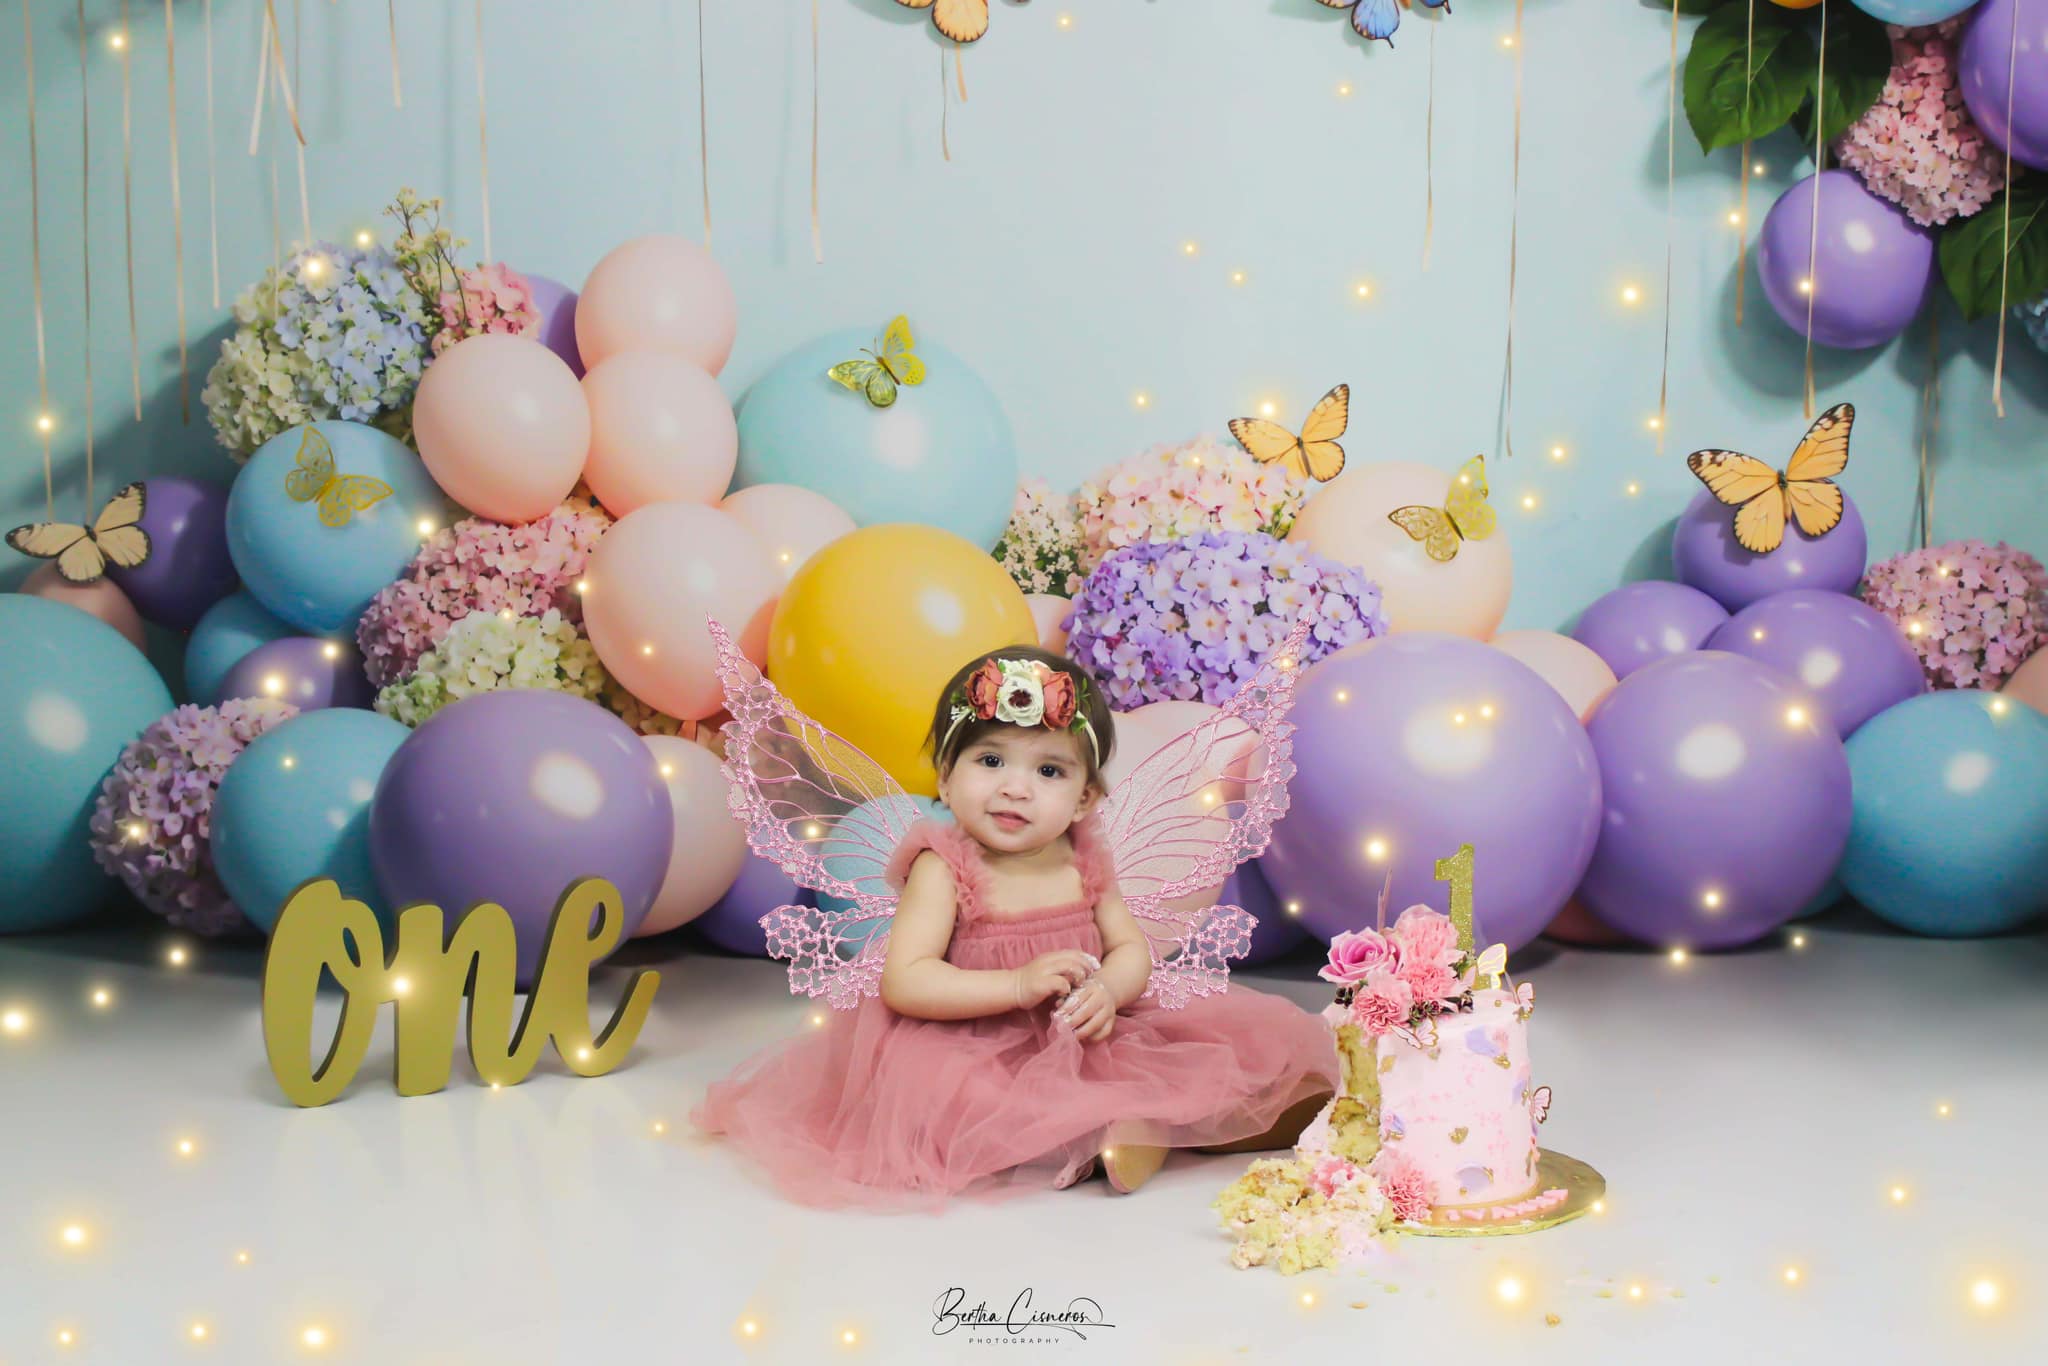 Kate Colorful Balloon Butterfly Wall Backdrop Designed by Emetselch